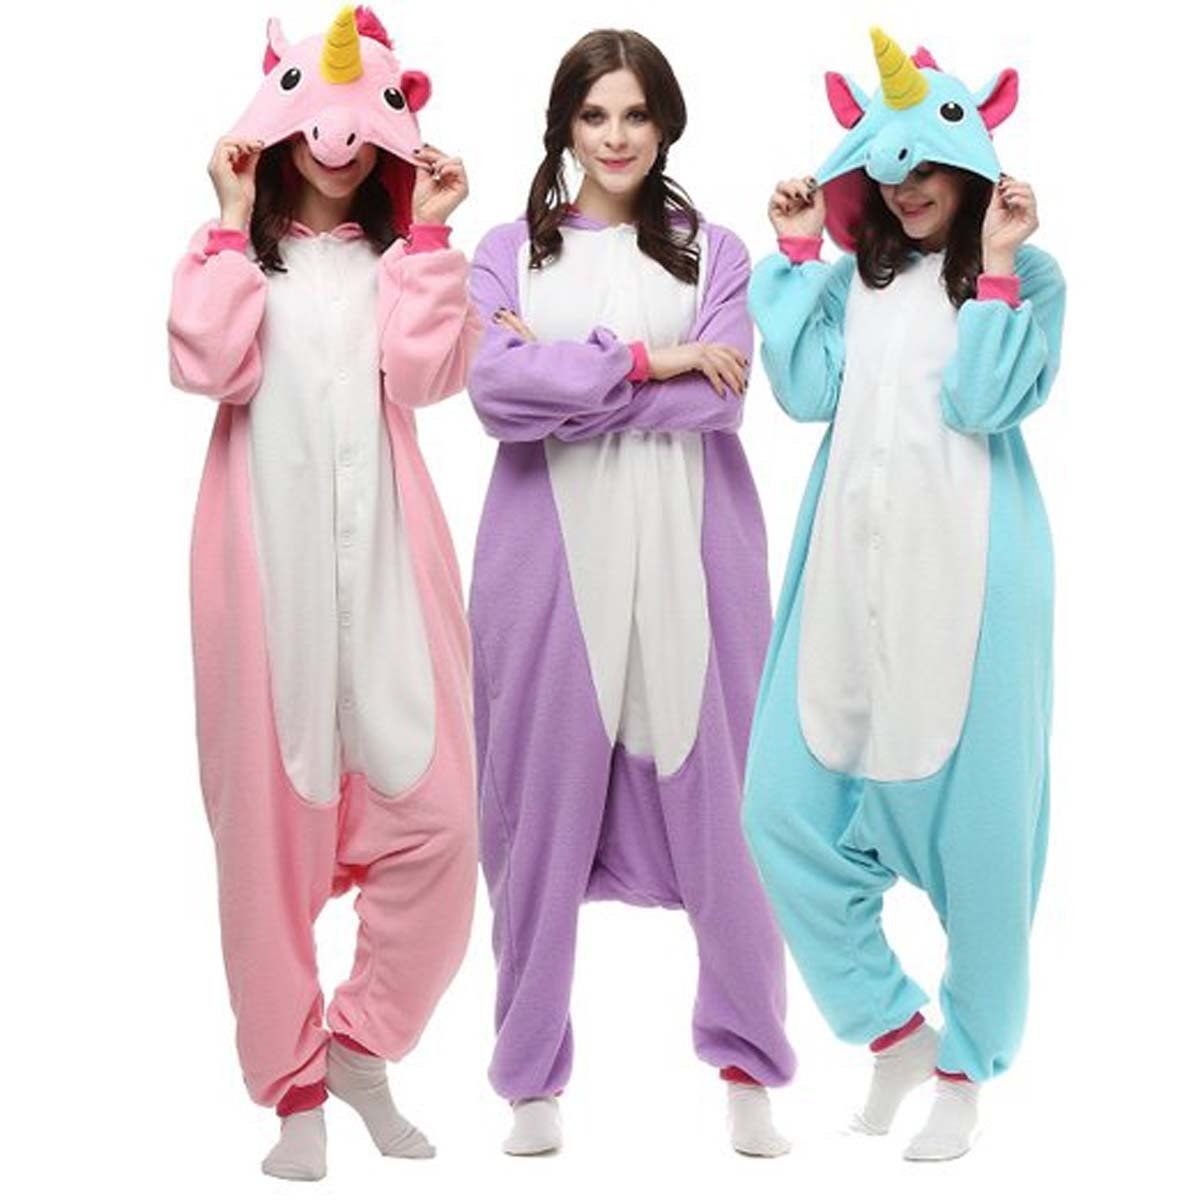 19 Of The Comfiest Things You'll Ever Wear